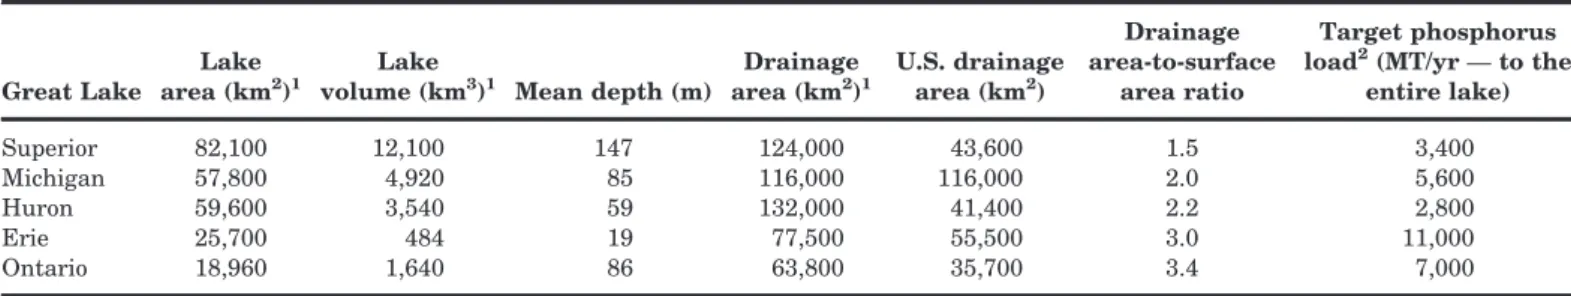 TABLE 1. Morphometric characteristics, drainage basin size, and total targeted annual phosphorus load for each Great Lake.